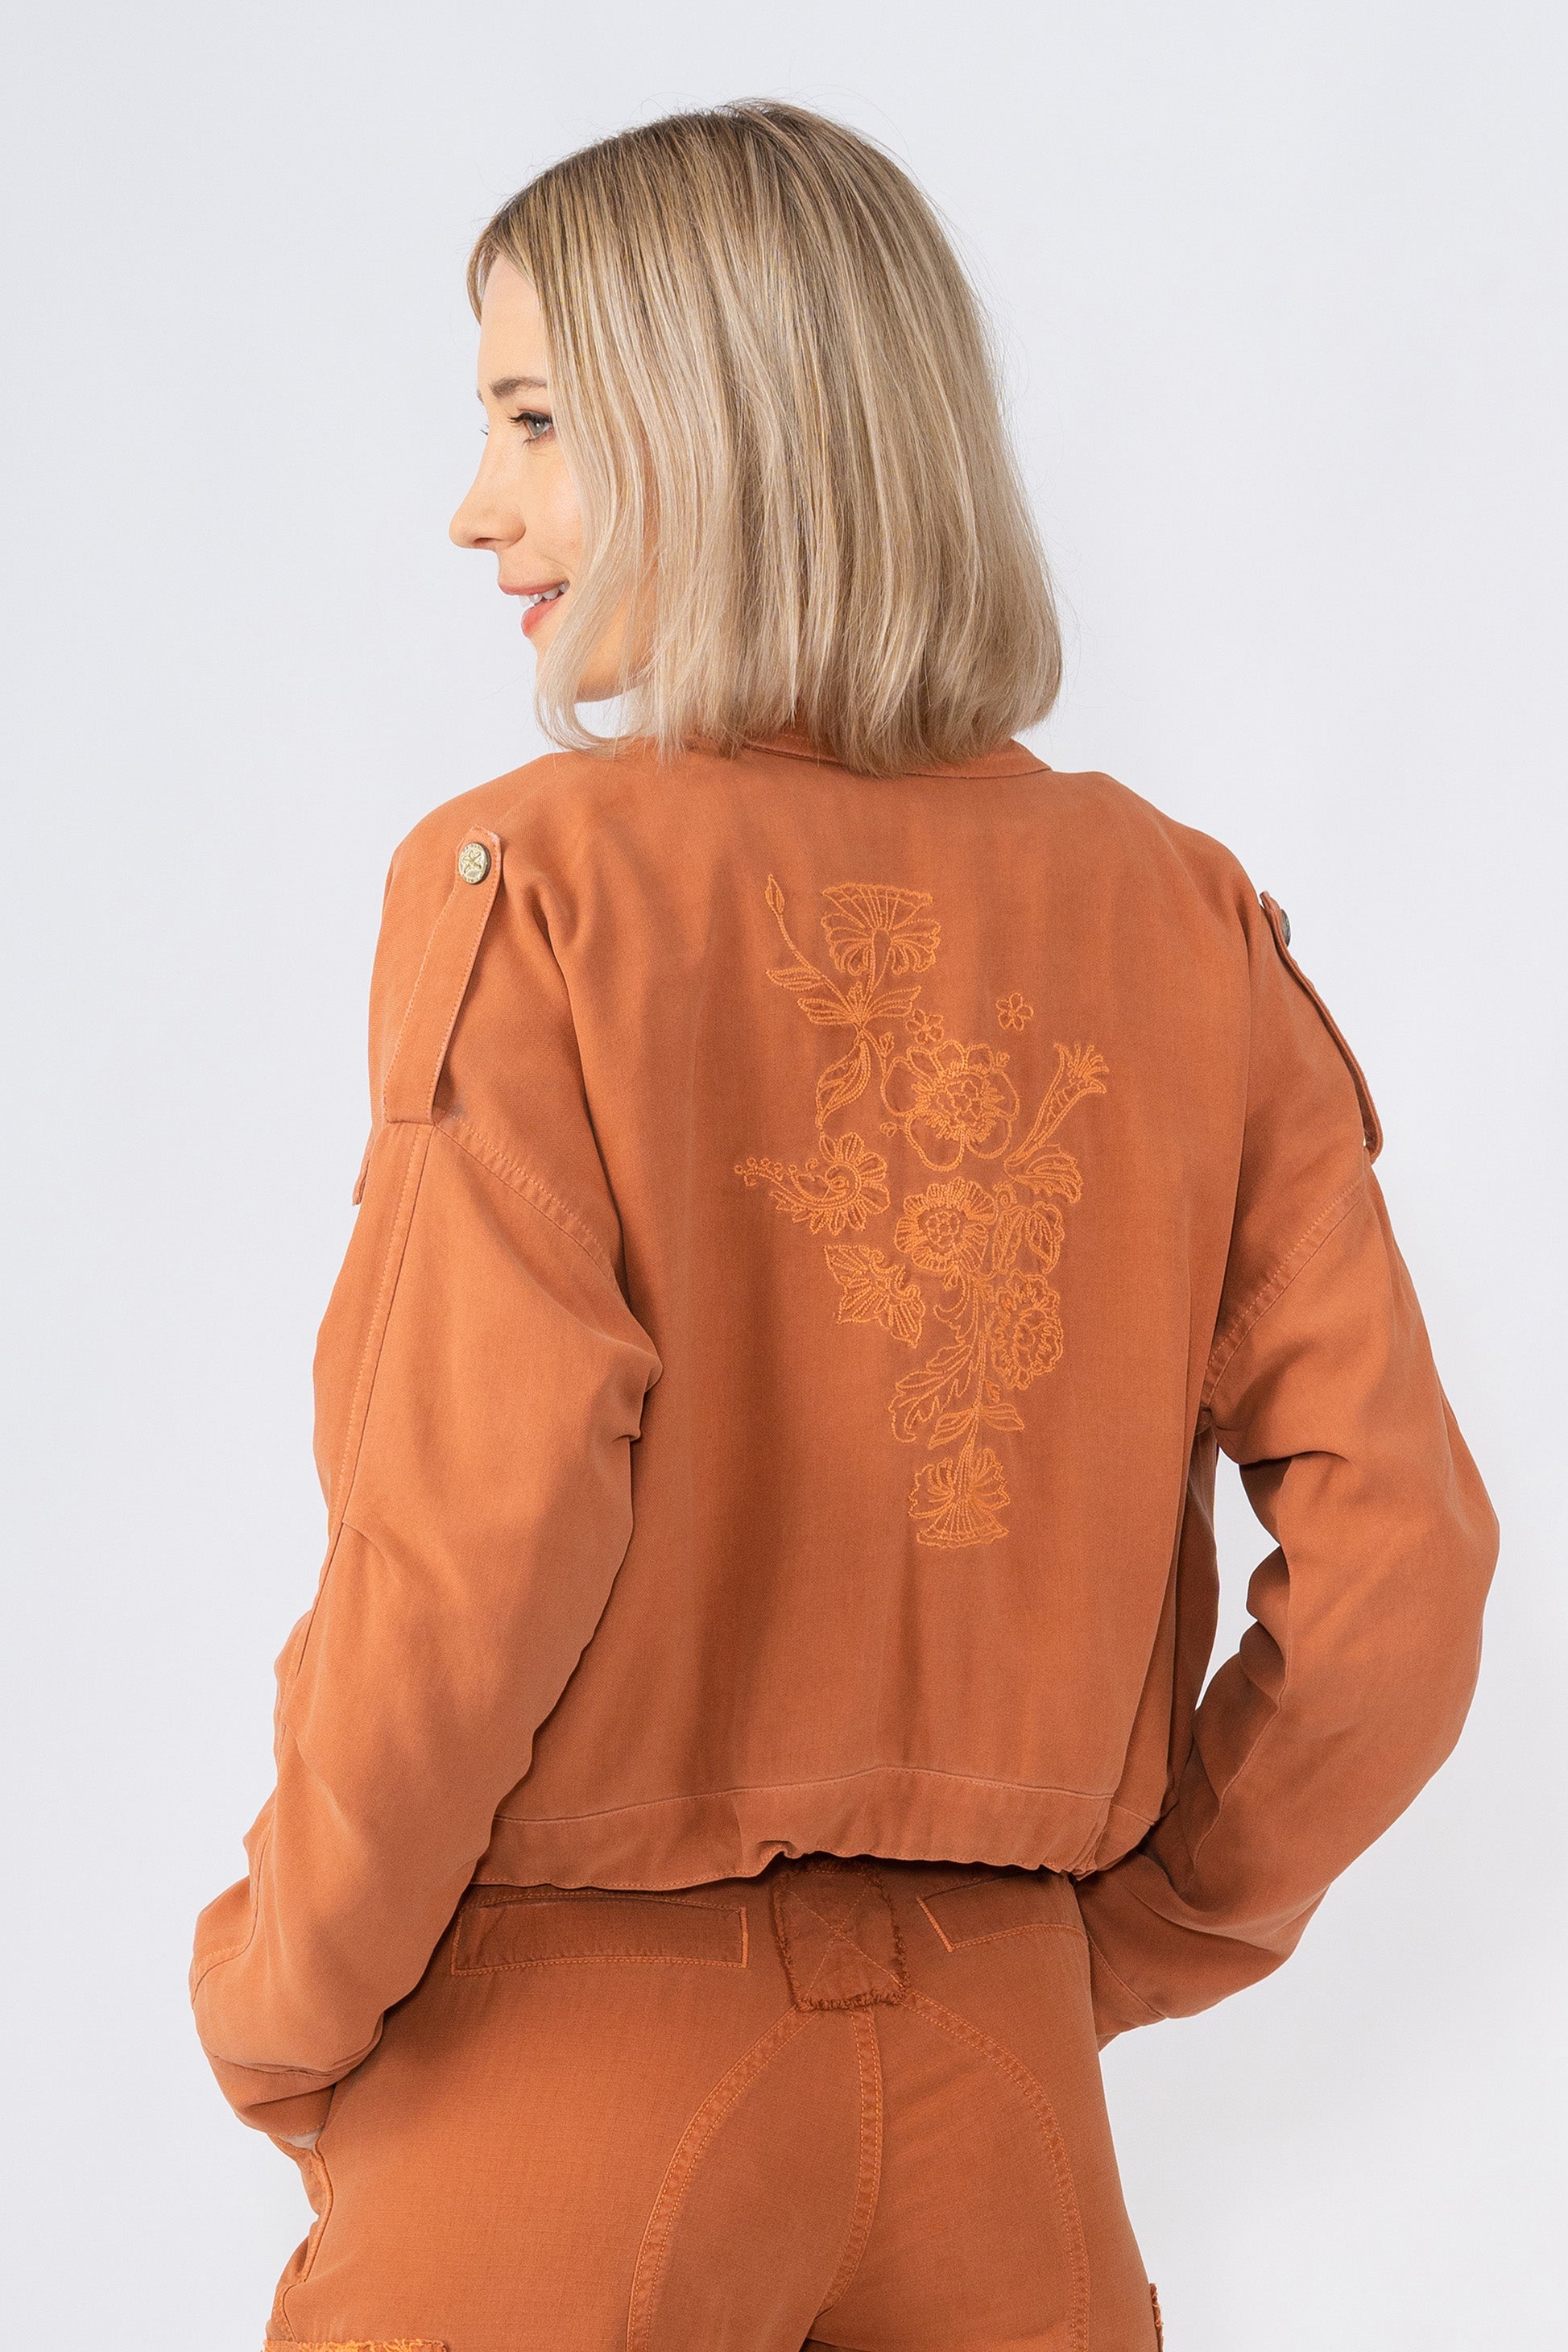 100% Silk crop lined jacket with embroidery in Toffee Brown